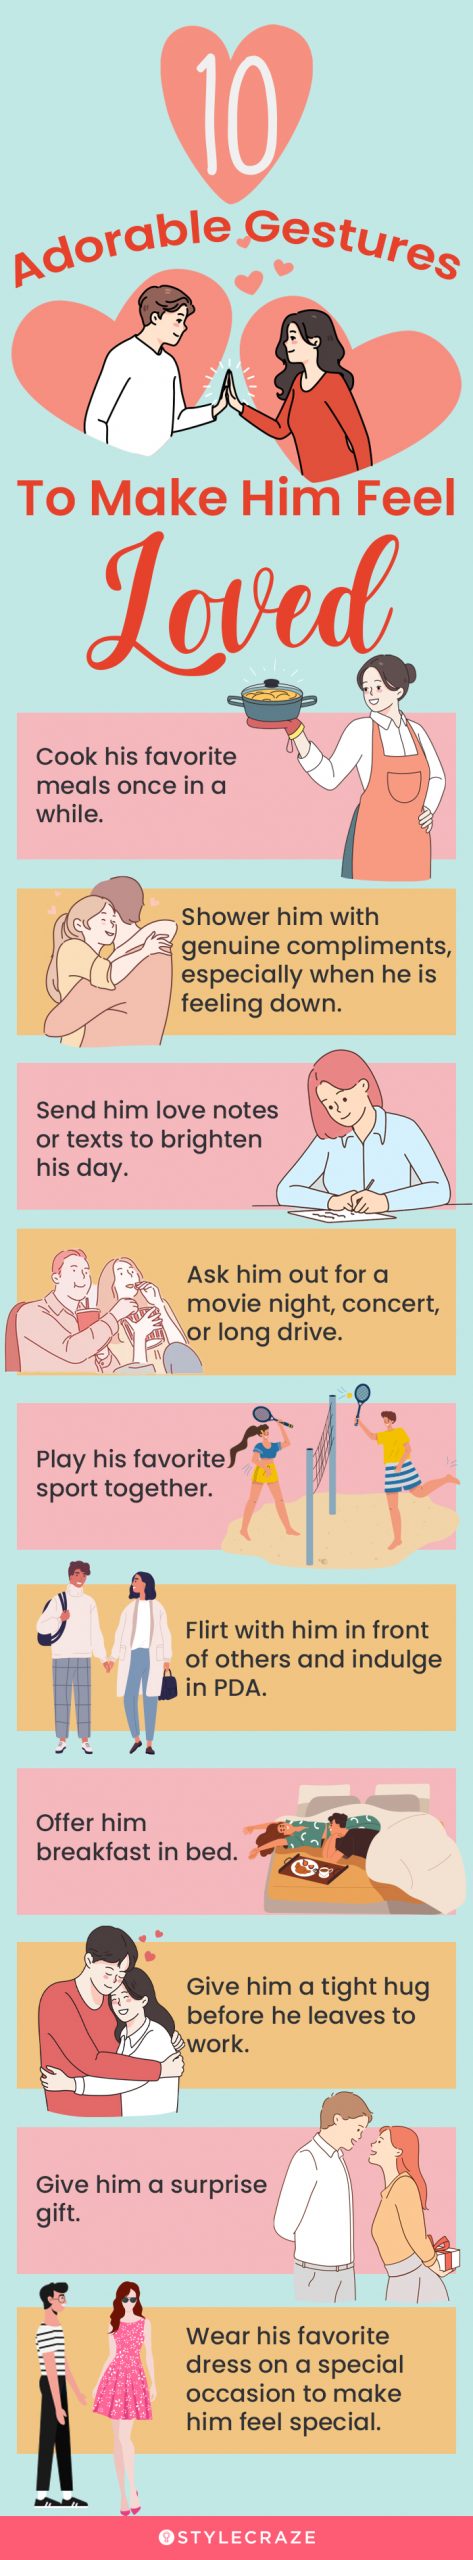 10 adorable gestures to make him feel loved [infographic]